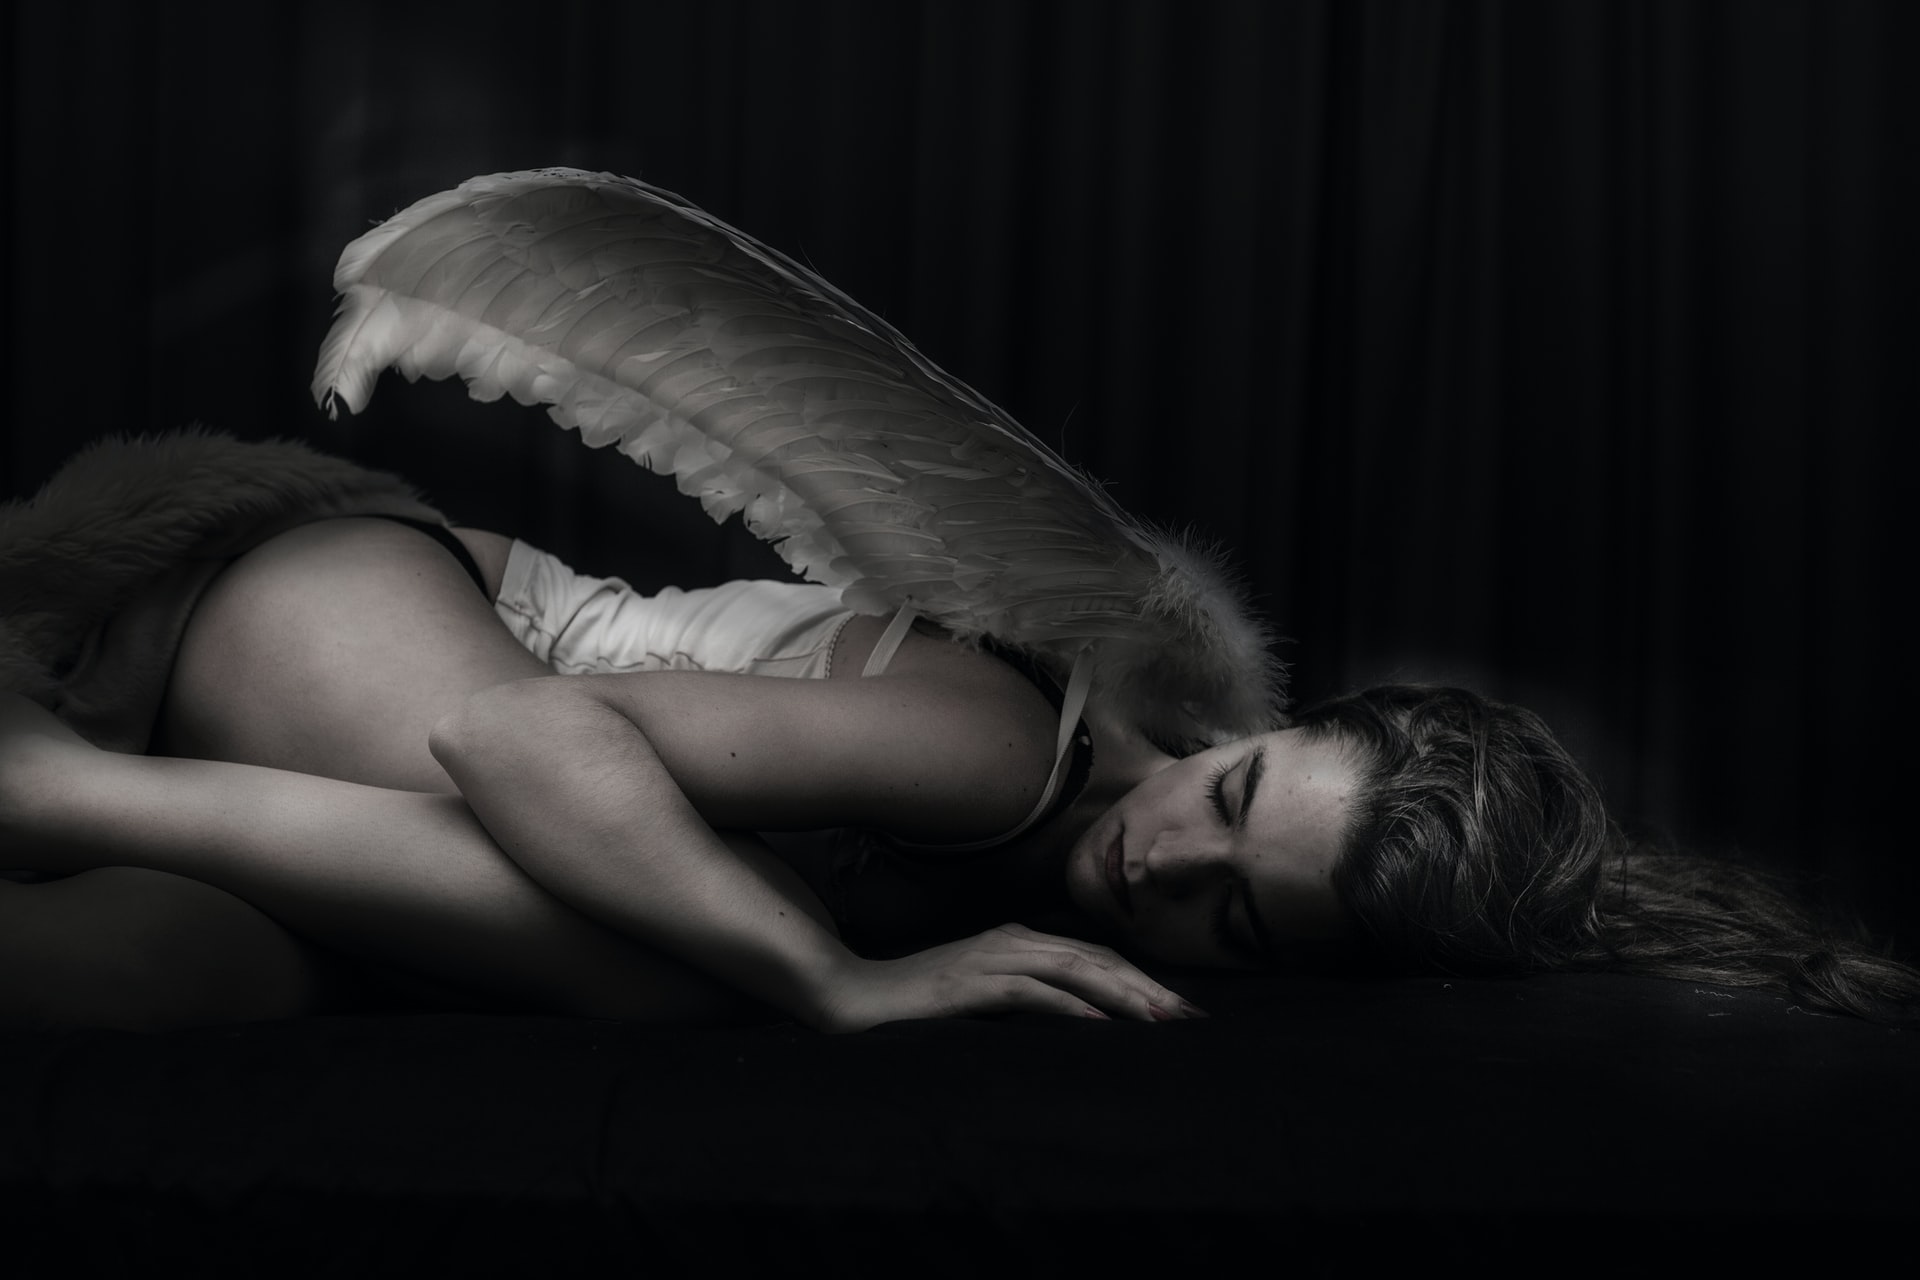 Woman With Wings In A Dark Room